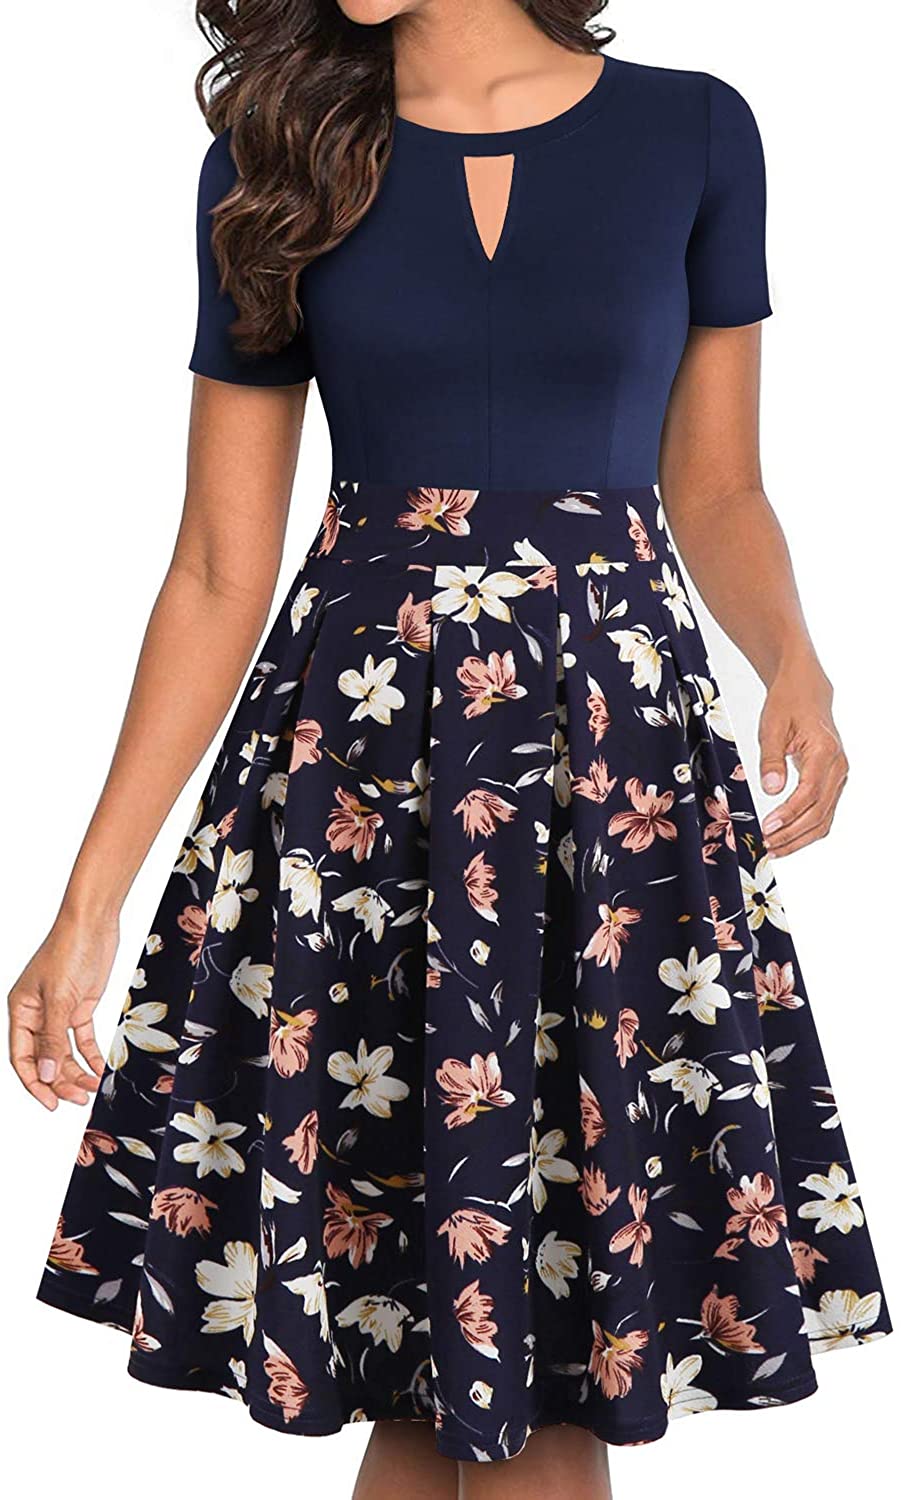 YATHON Women's Vintage Floral Flared A-Line Swing Casual Party Dresses ...